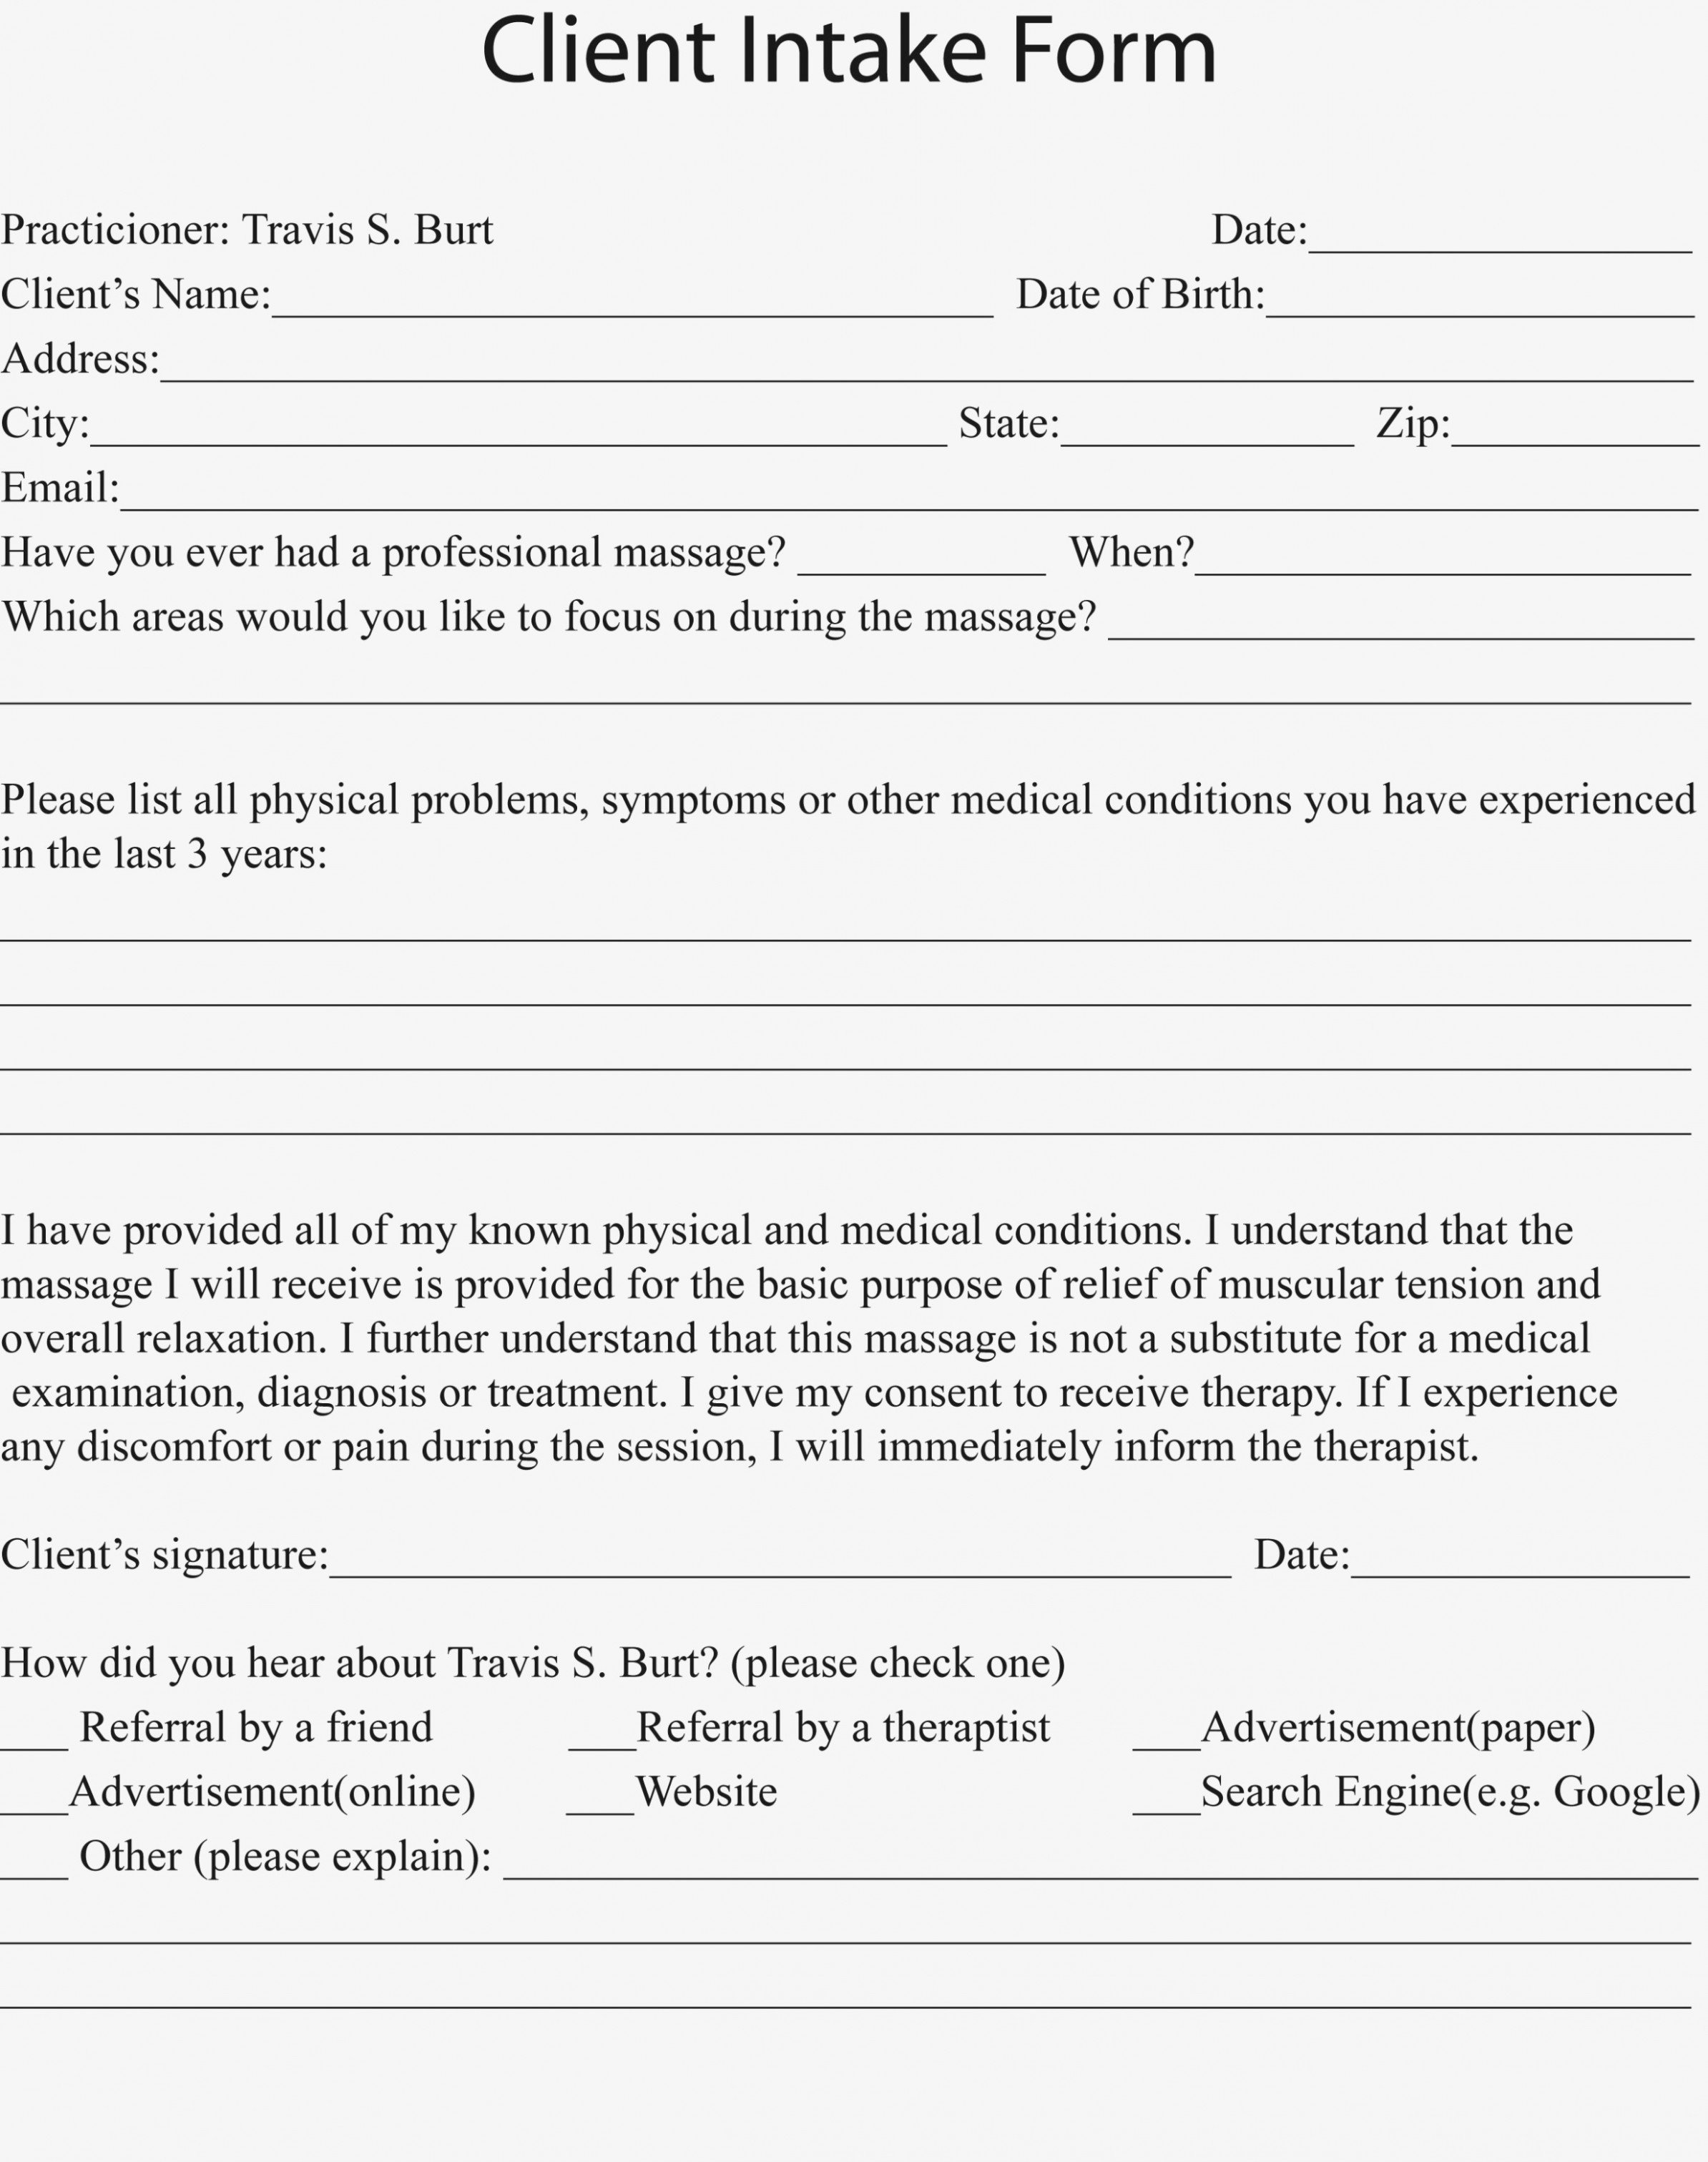 Massage Intake form Templates New How to Leave Client Intake